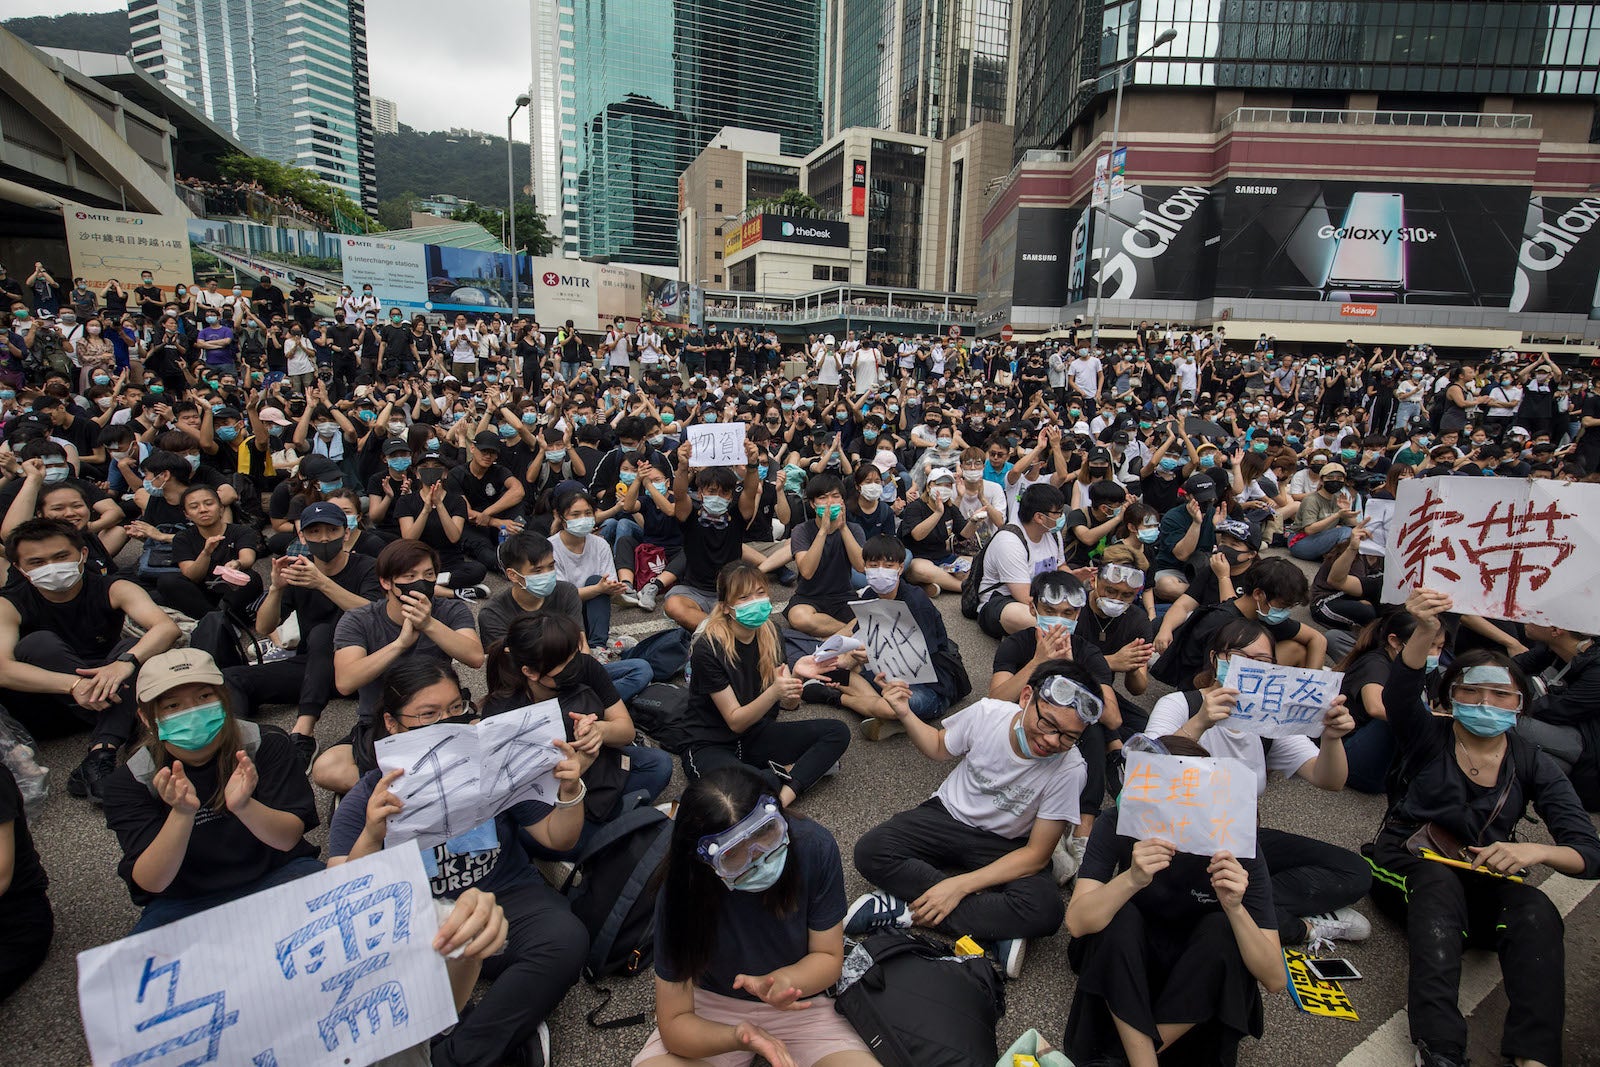 Protests Escalate In Hong Kong But You Can Travel Without Fear The